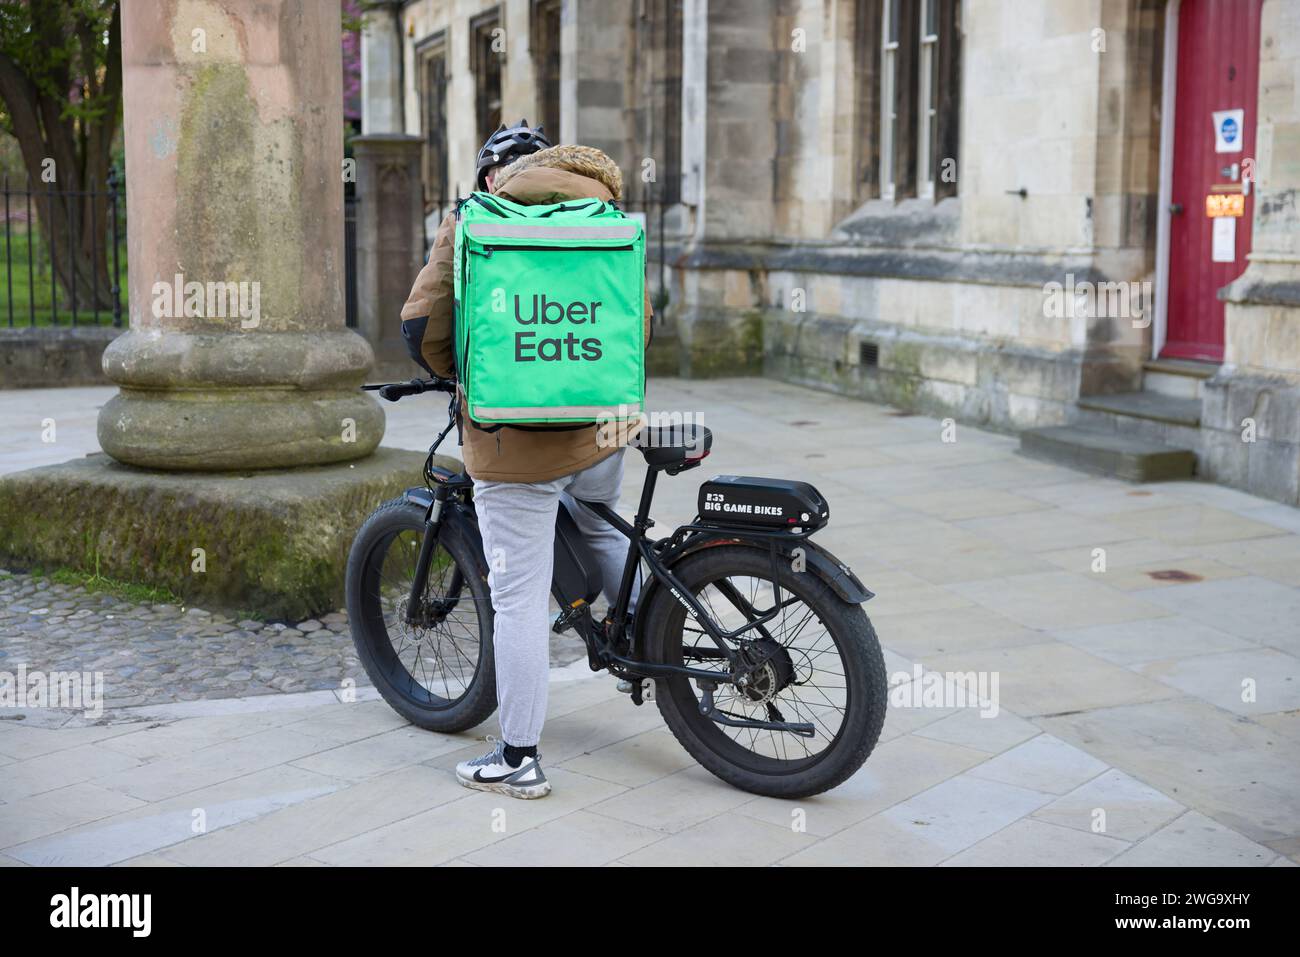 YORK, UK - April 17, 2023. Uber Eats delivery driver on a bicycle, York, UK. Food delivery gig economy. Stock Photo